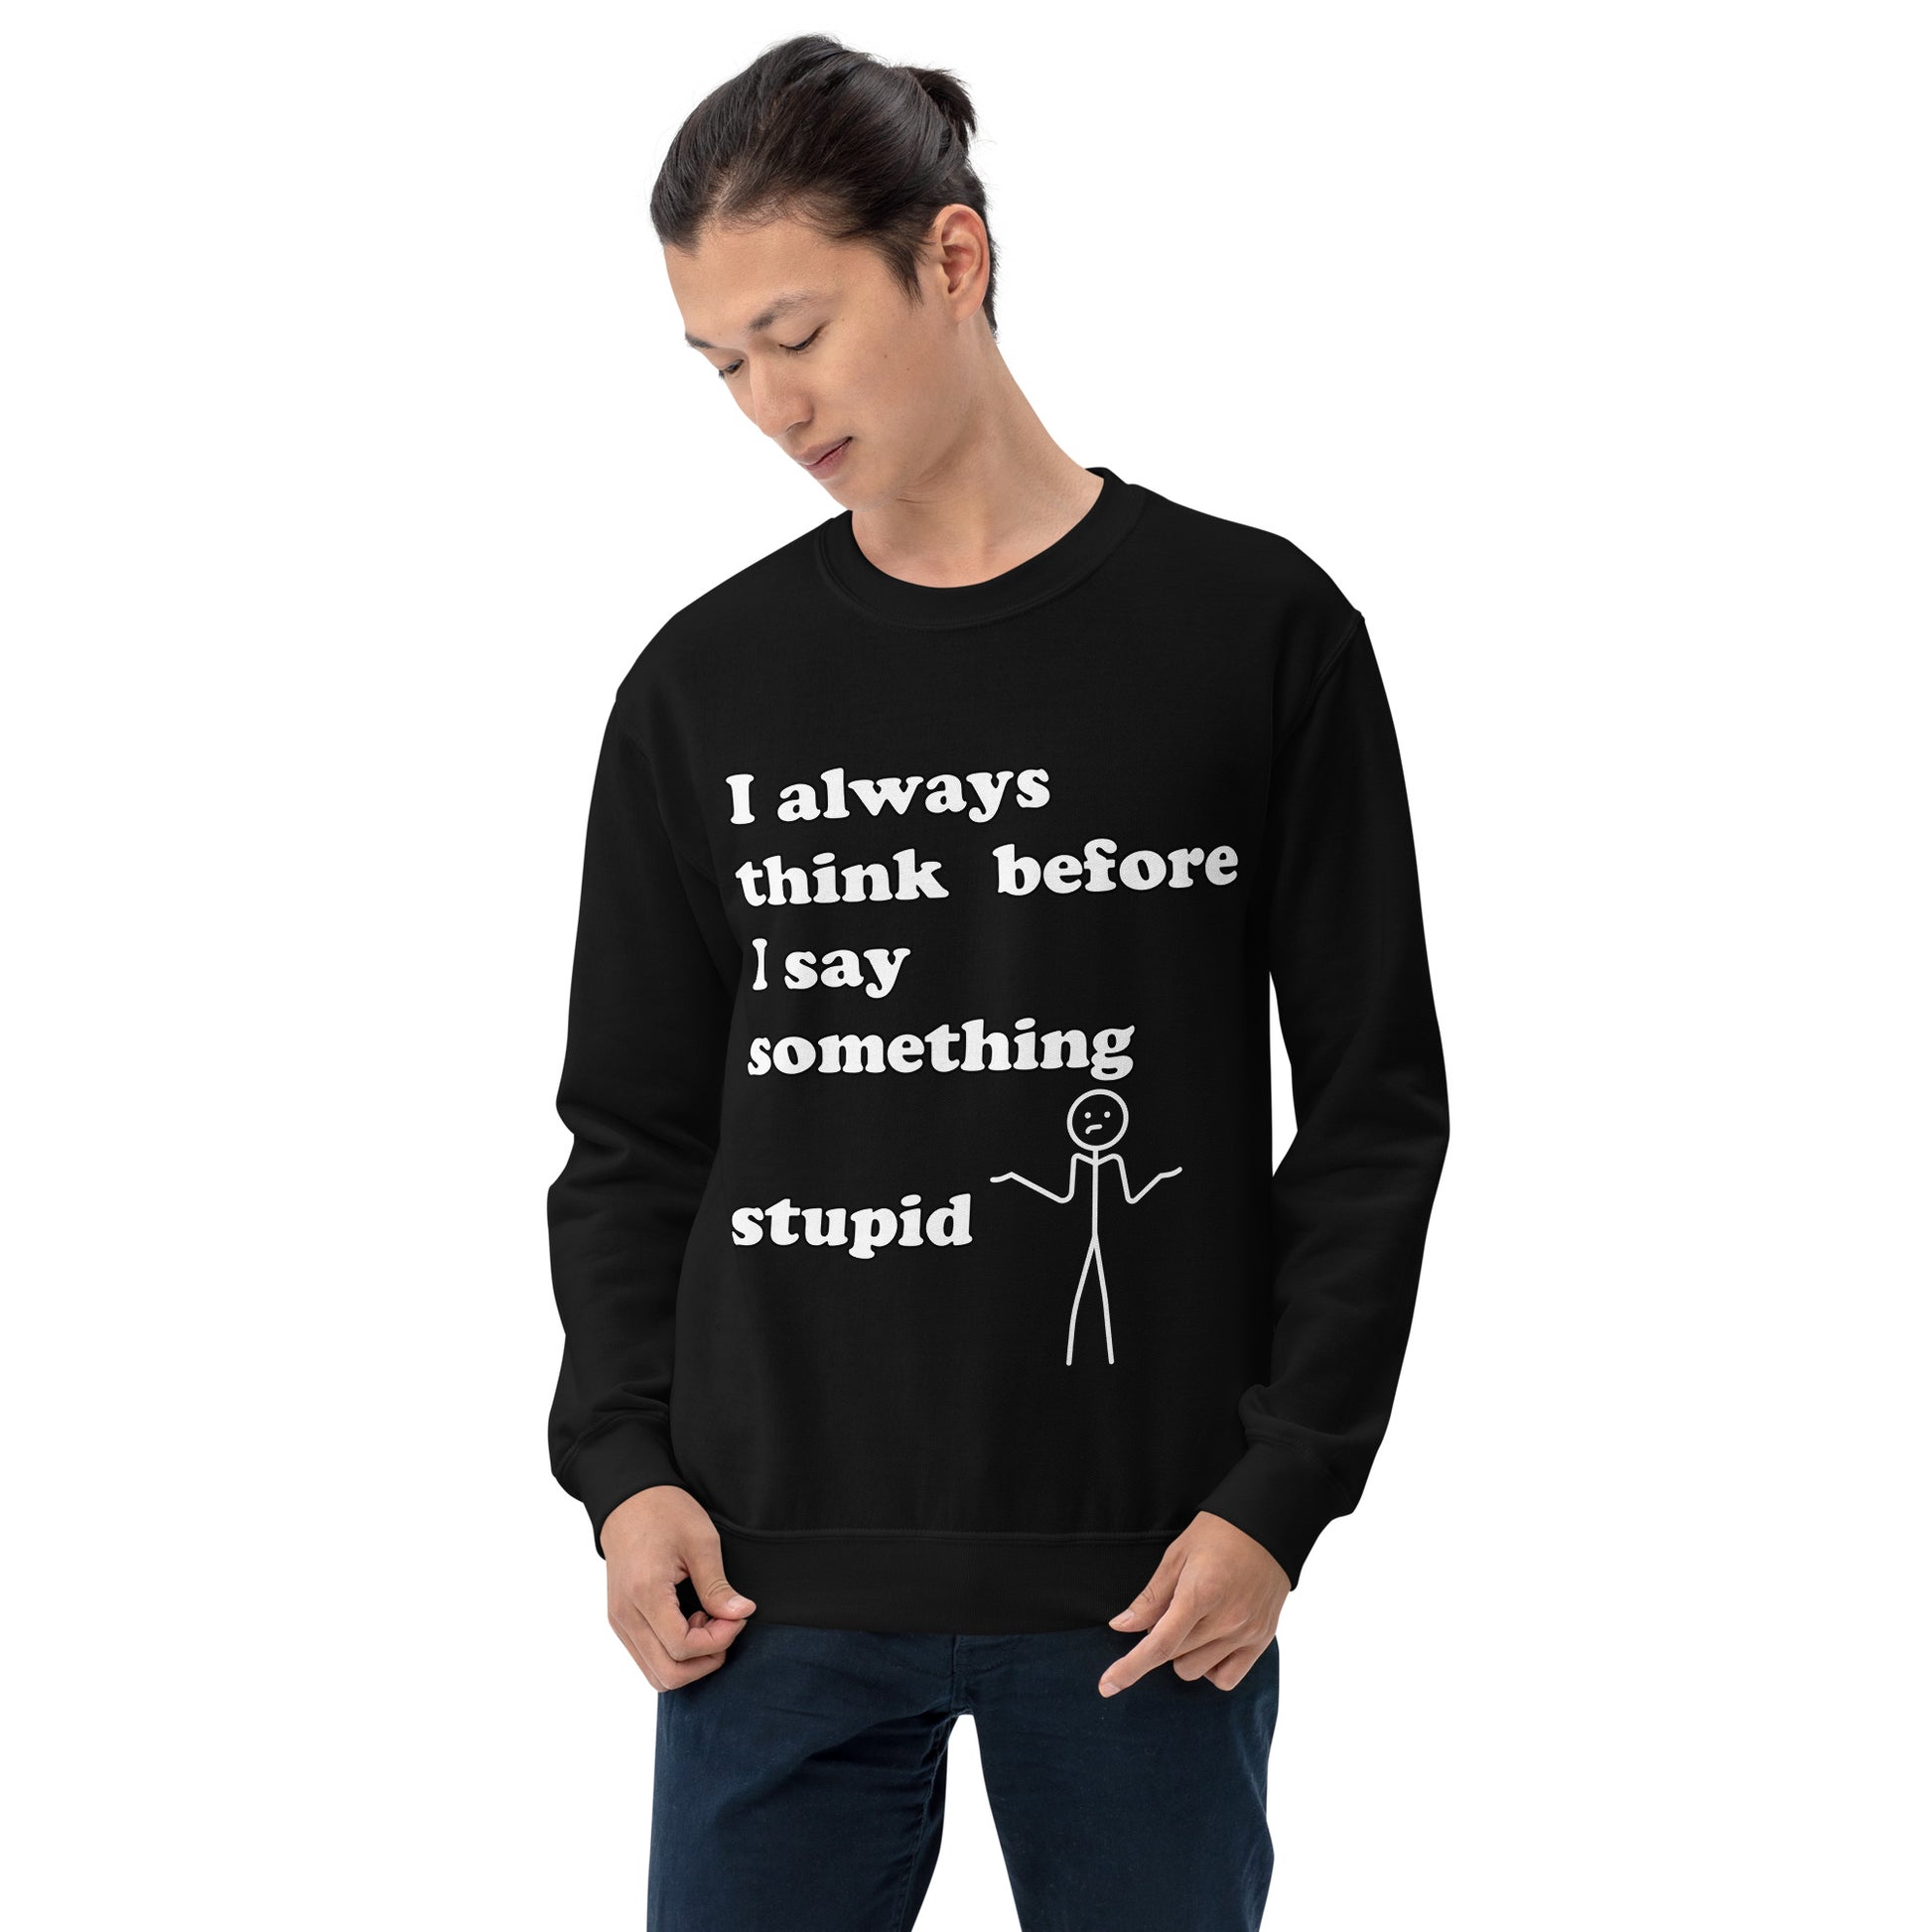 Man with black sweatshirt with text "I always think before I say something stupid"